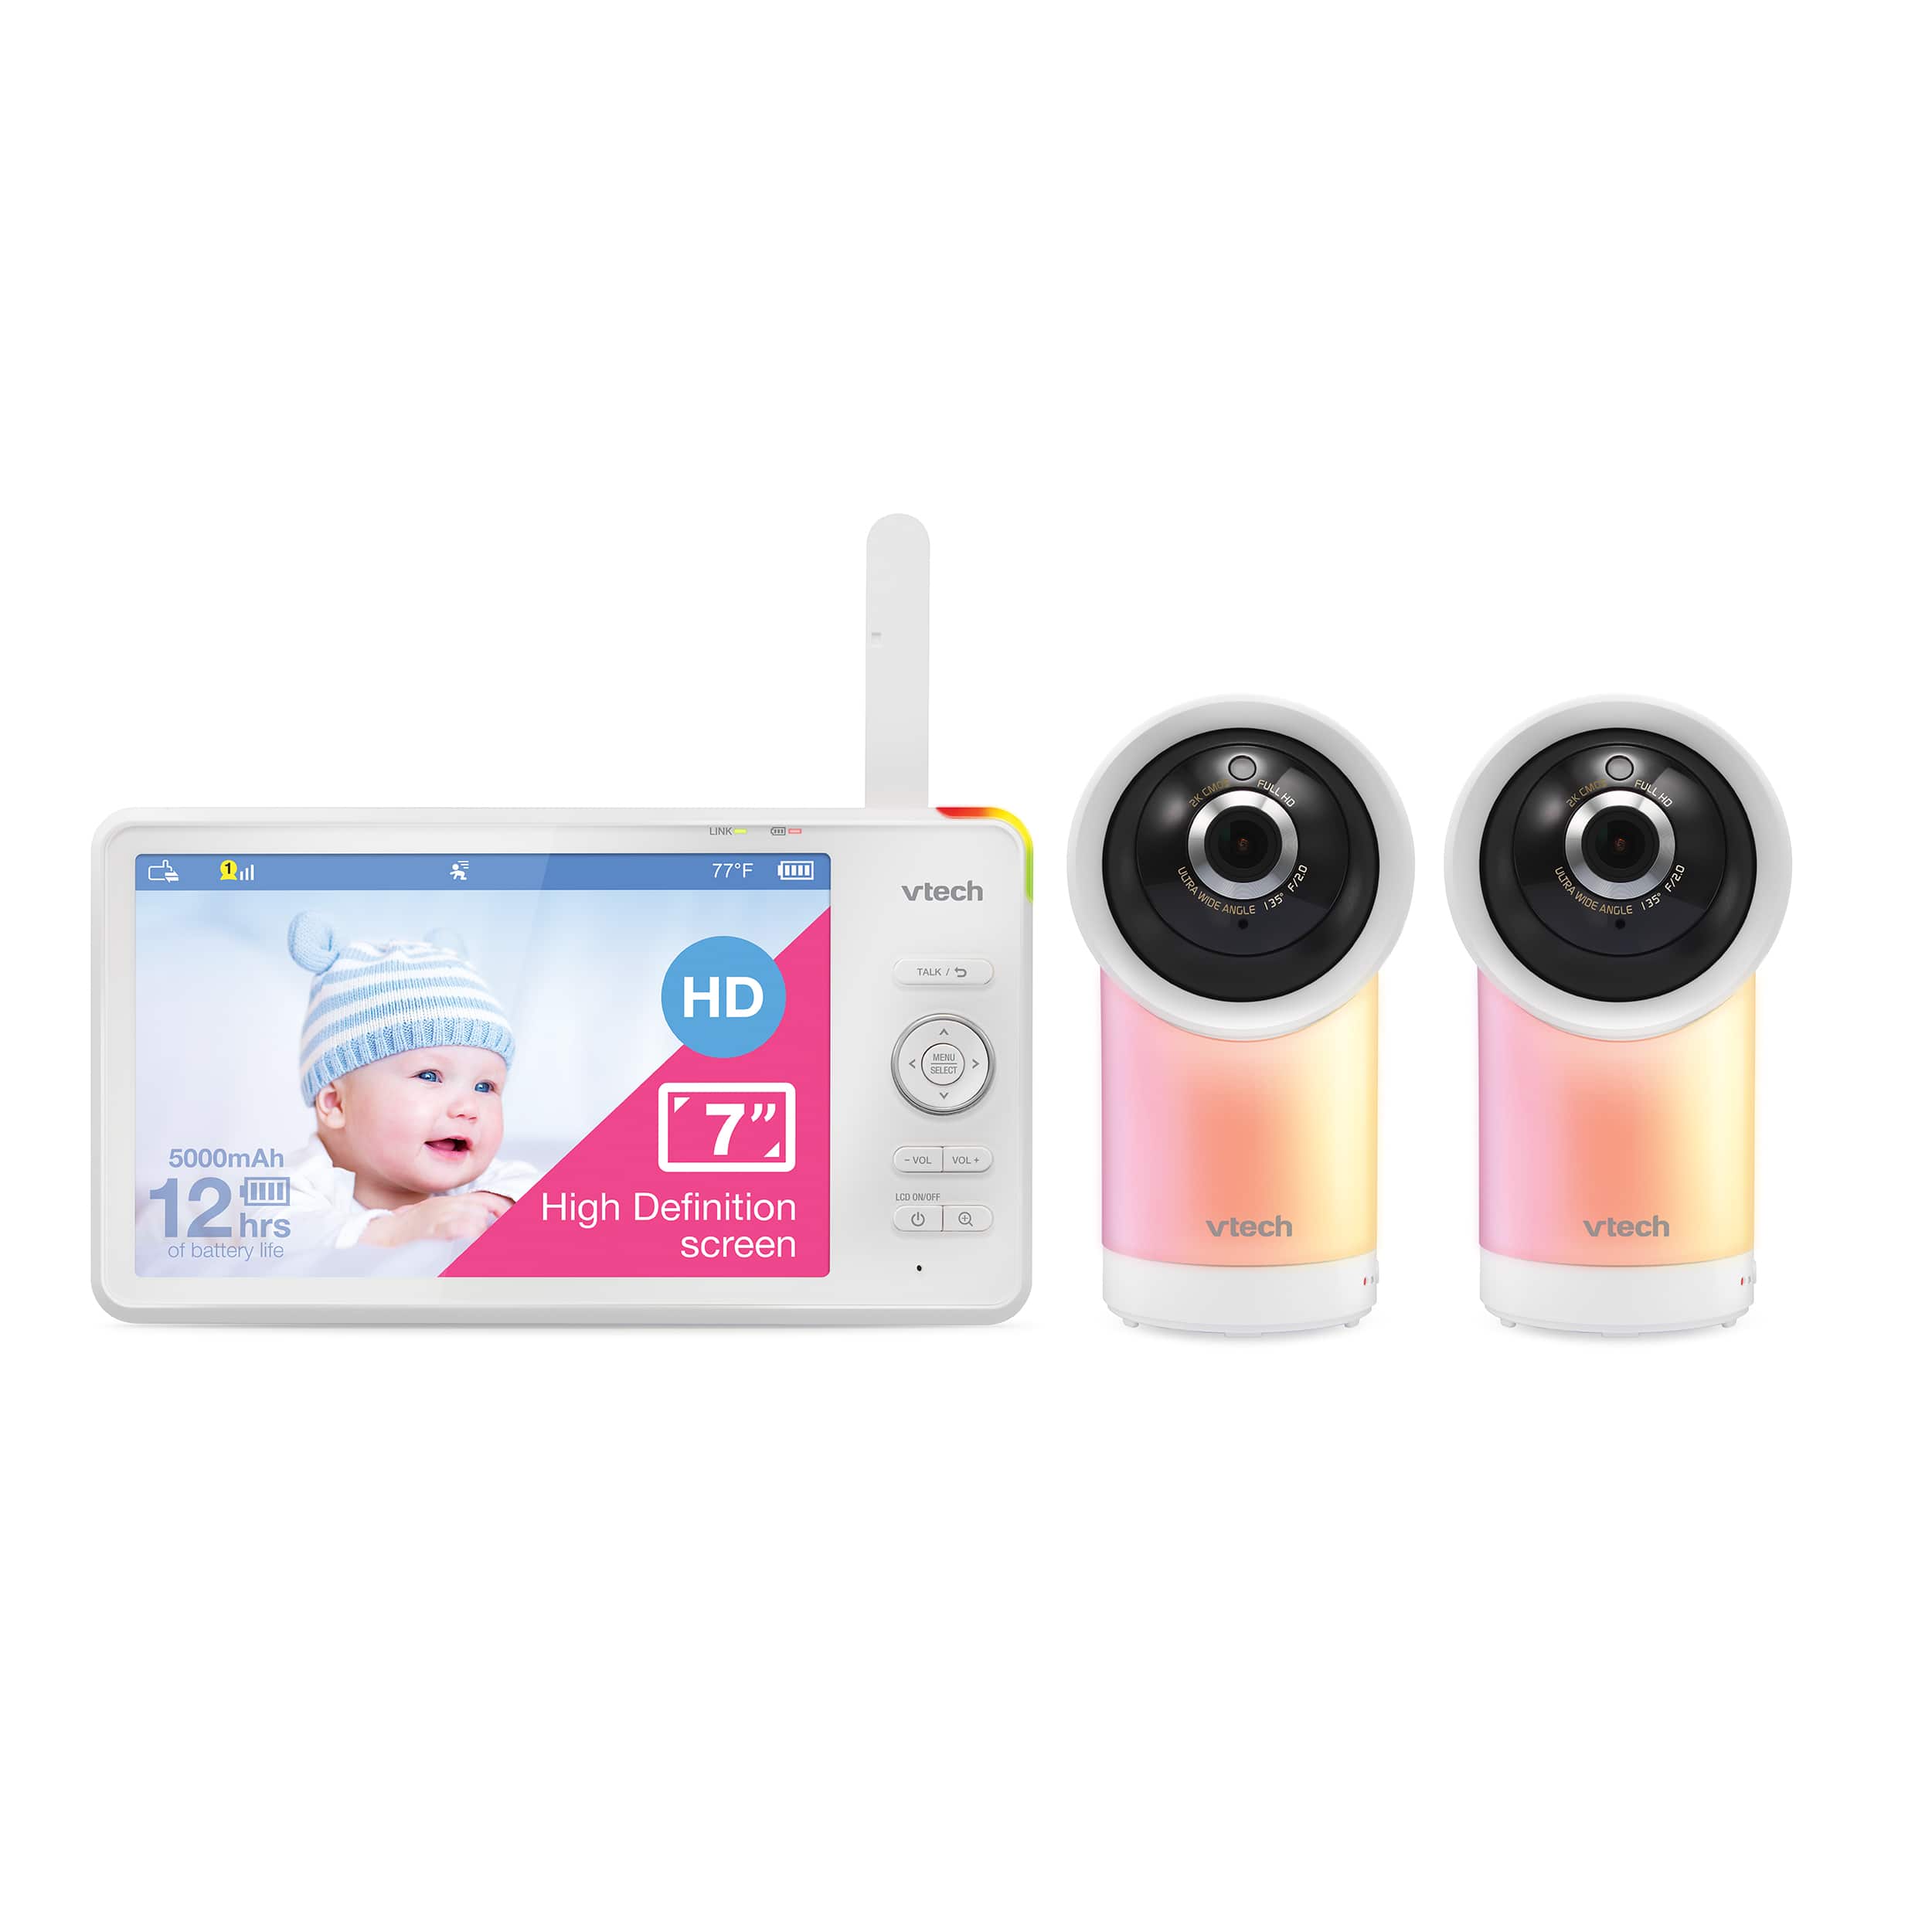 2 Camera 1080p Smart WiFi Remote Access 360 Degree Pan & Tilt Video Baby Monitor with 7" High Definition 720p Display, Night Light